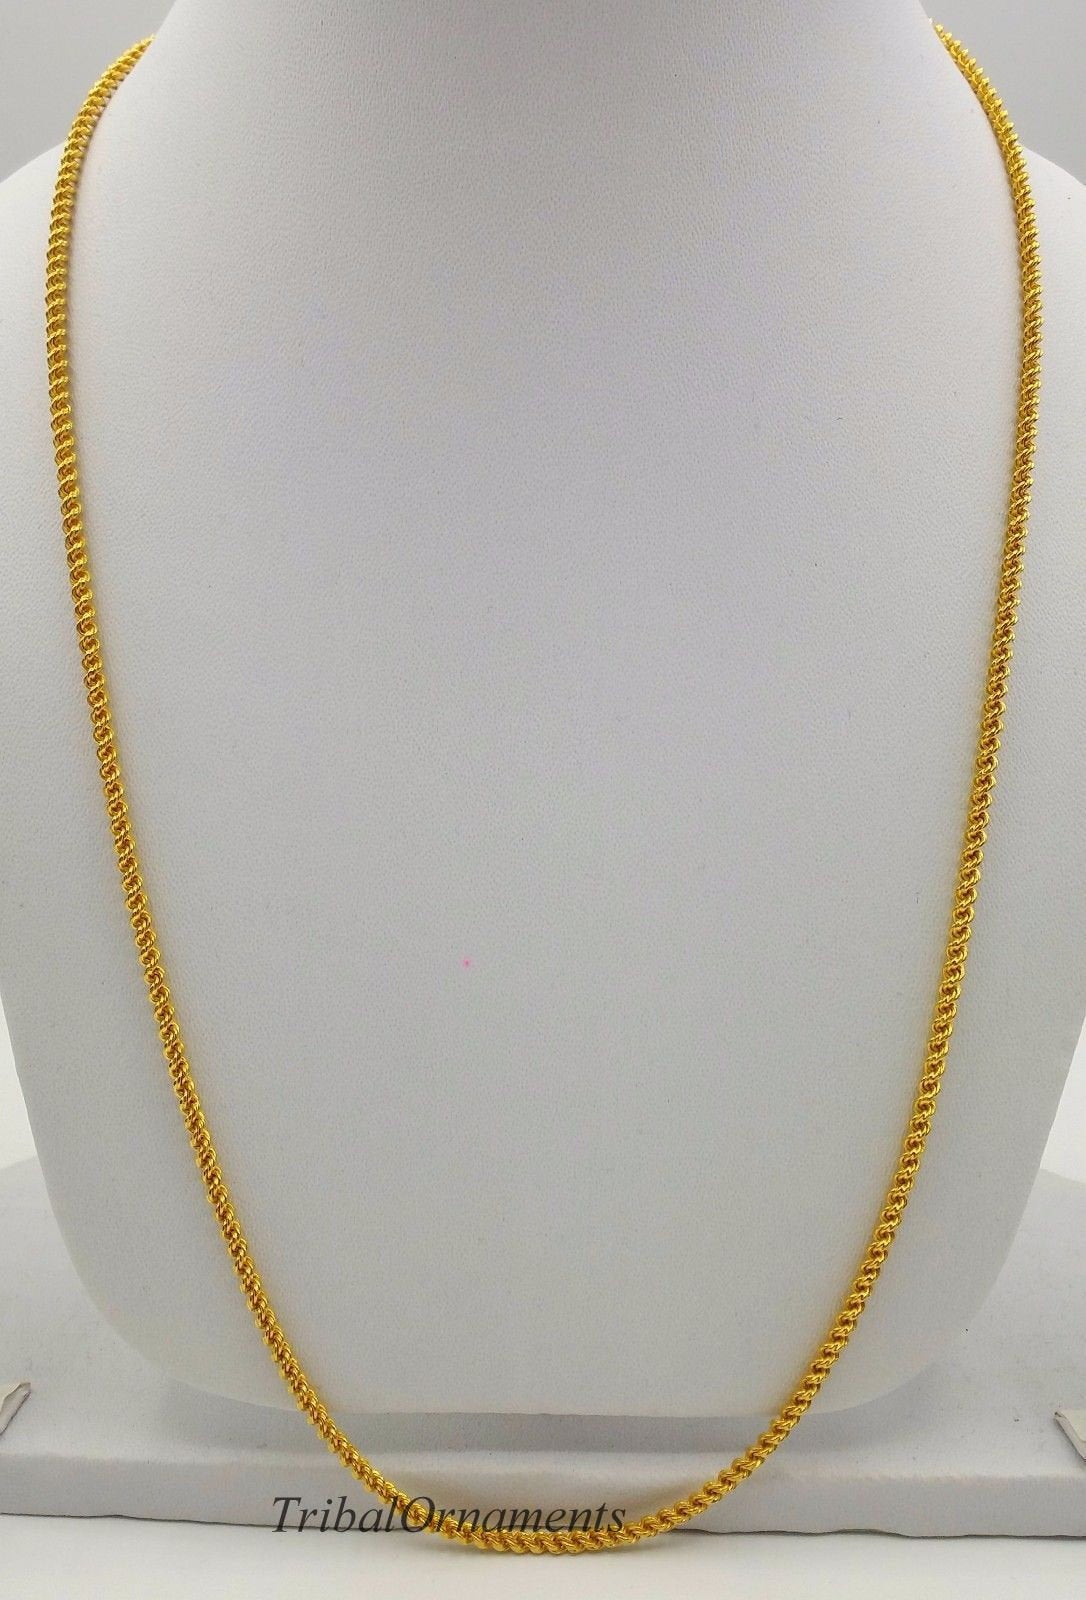 22k yellow gold Traditional design handmade fabulous rope chain 22 inches 2.5 mm twisted rope chain unisex jewelry - TRIBAL ORNAMENTS